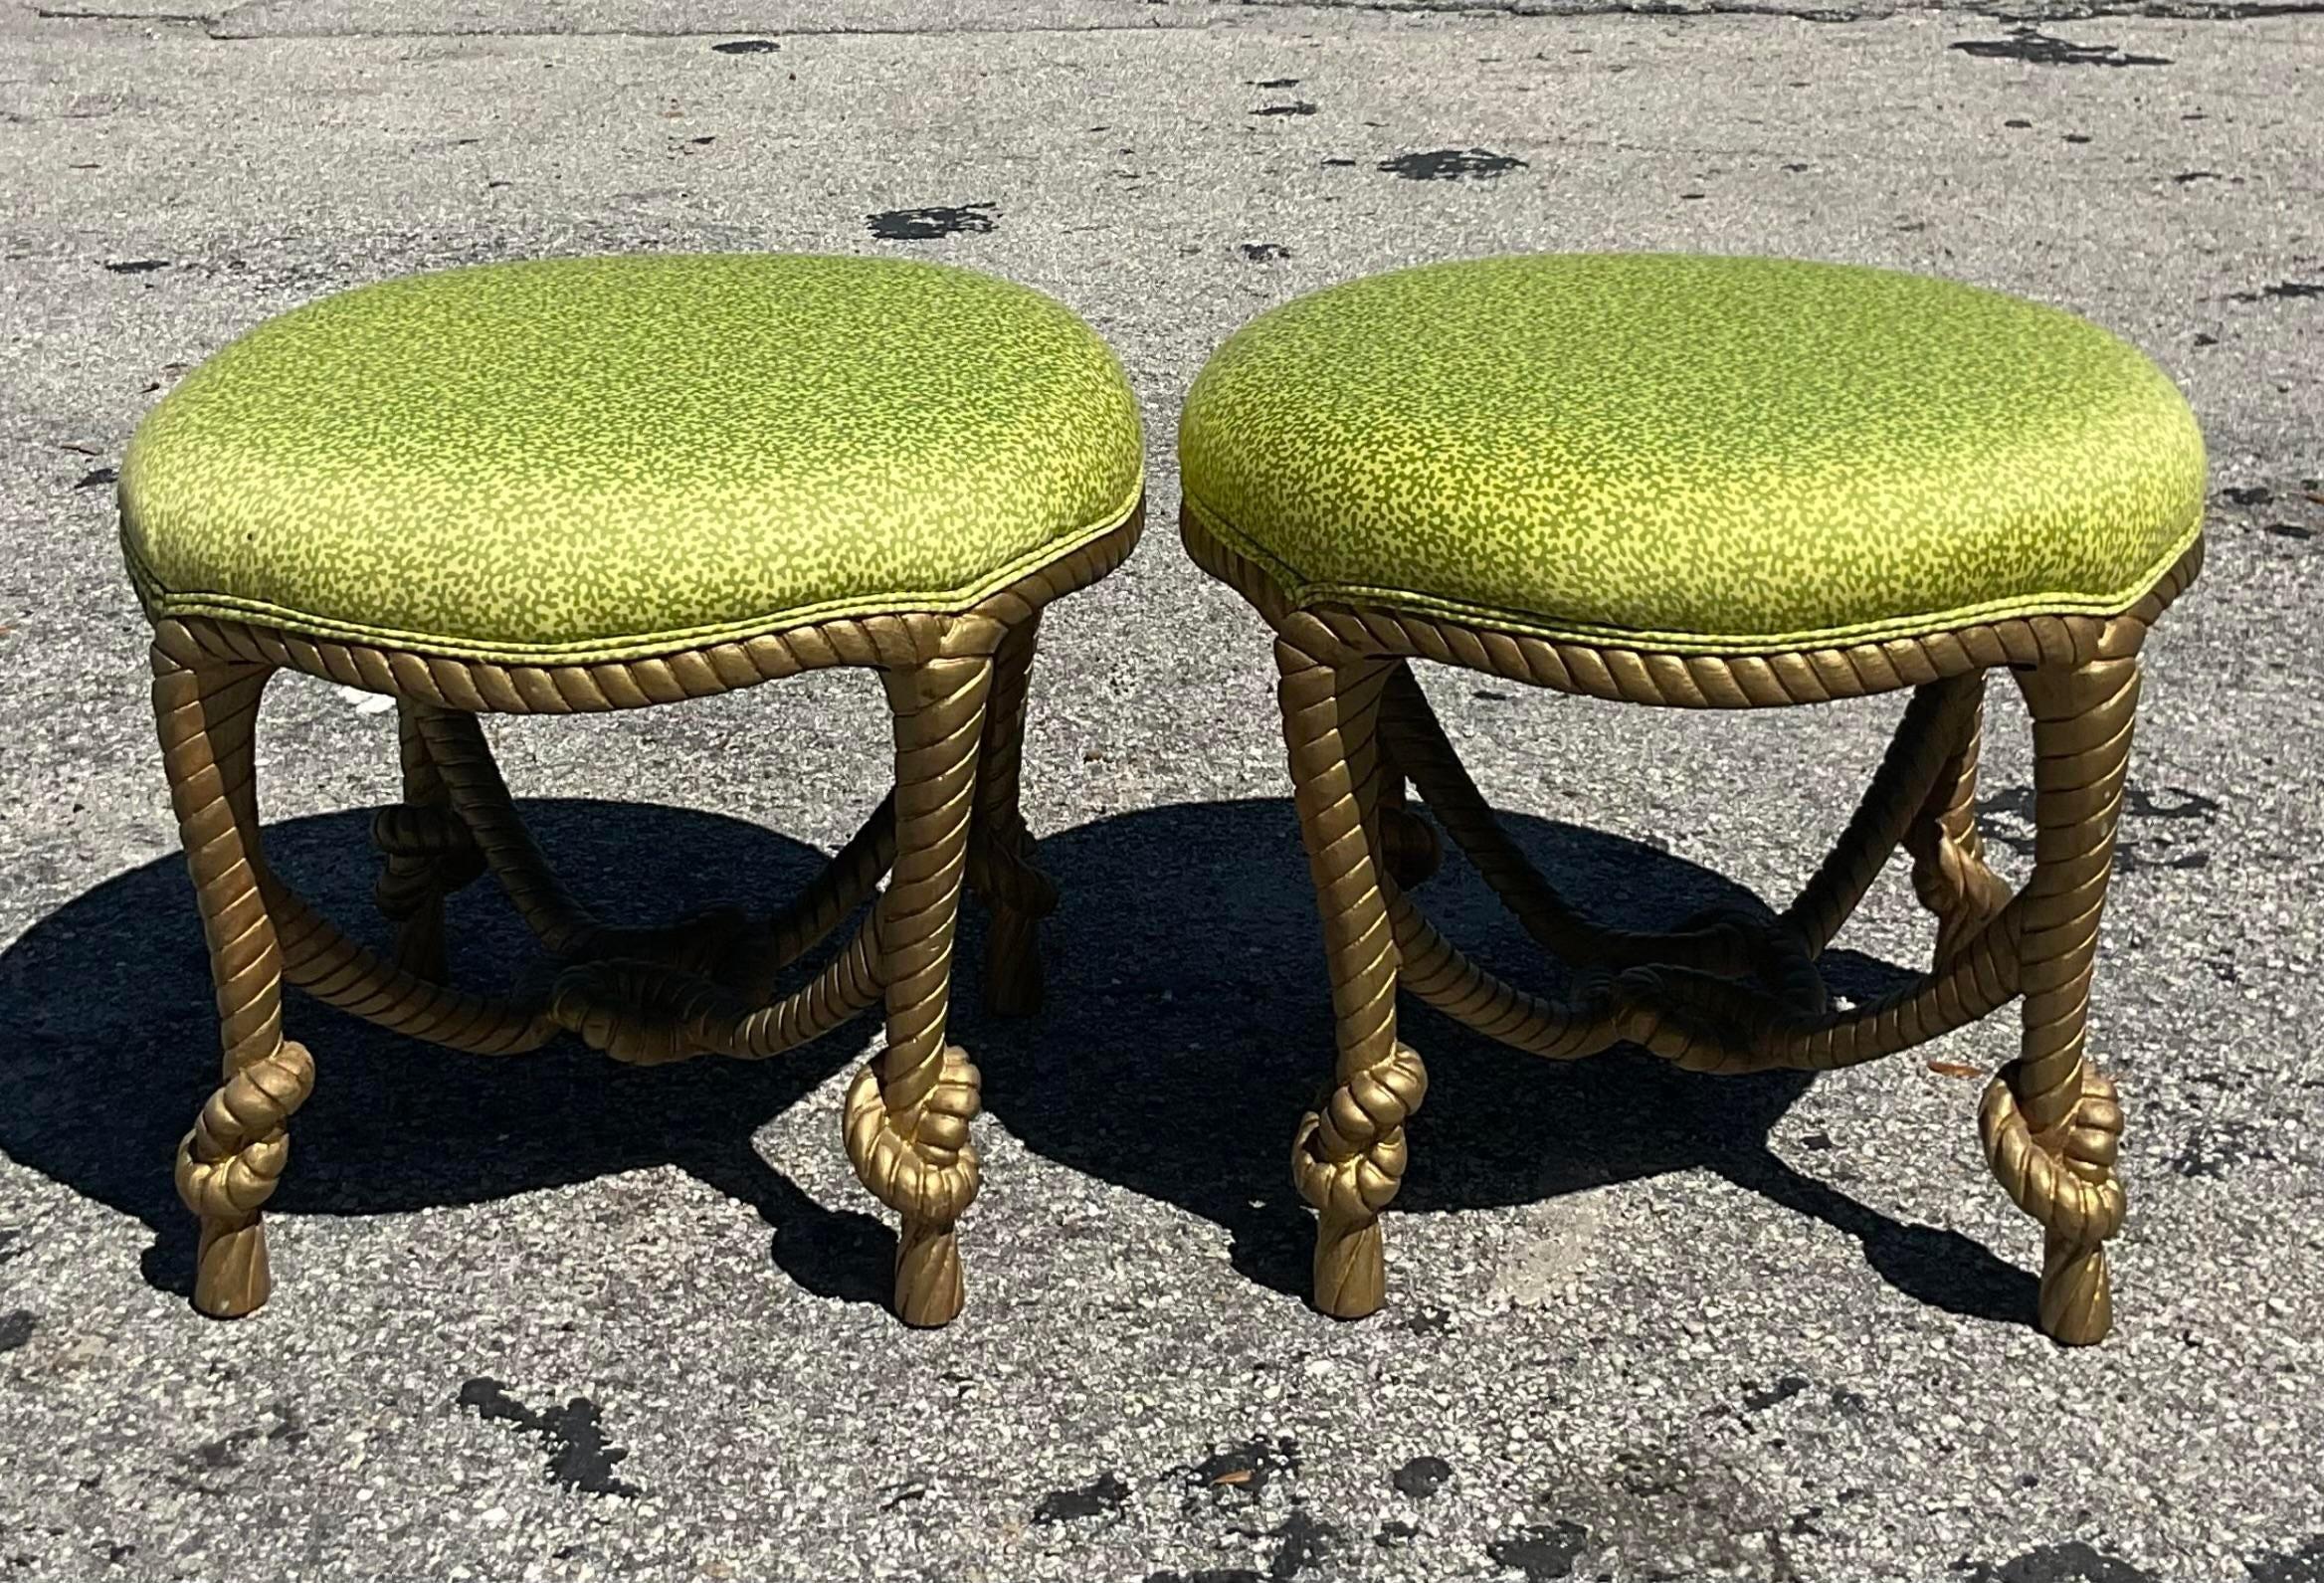 A stunning pair of vintage Boho low stools. A chic carved wood frame with a rope and knot design. Upholstered in a bright apple green floral. Acquired from a Palm Beach estate.